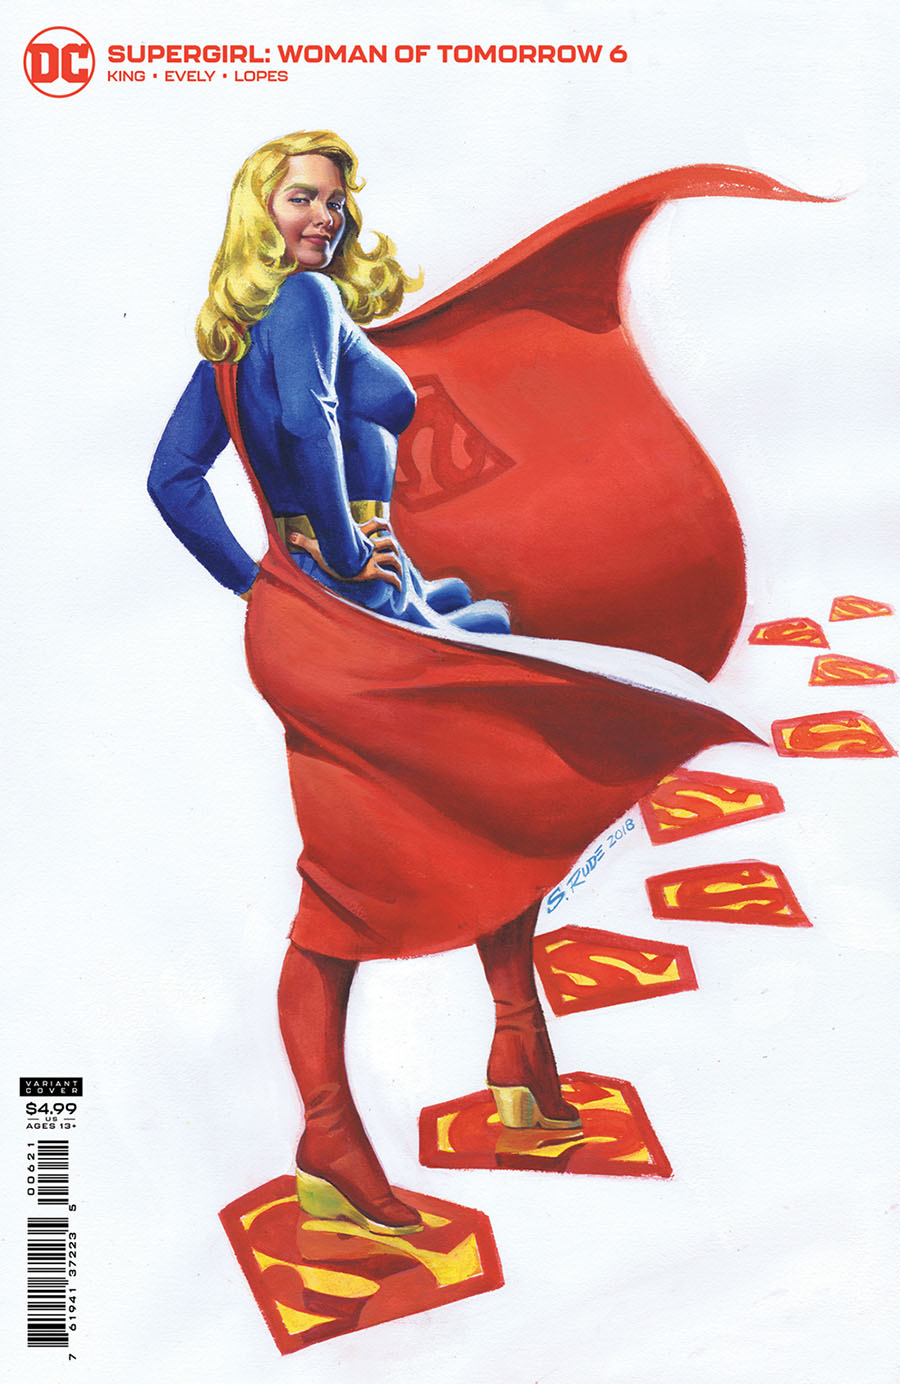 Supergirl Woman Of Tomorrow #6 Cover B Variant Steve Rude Cover